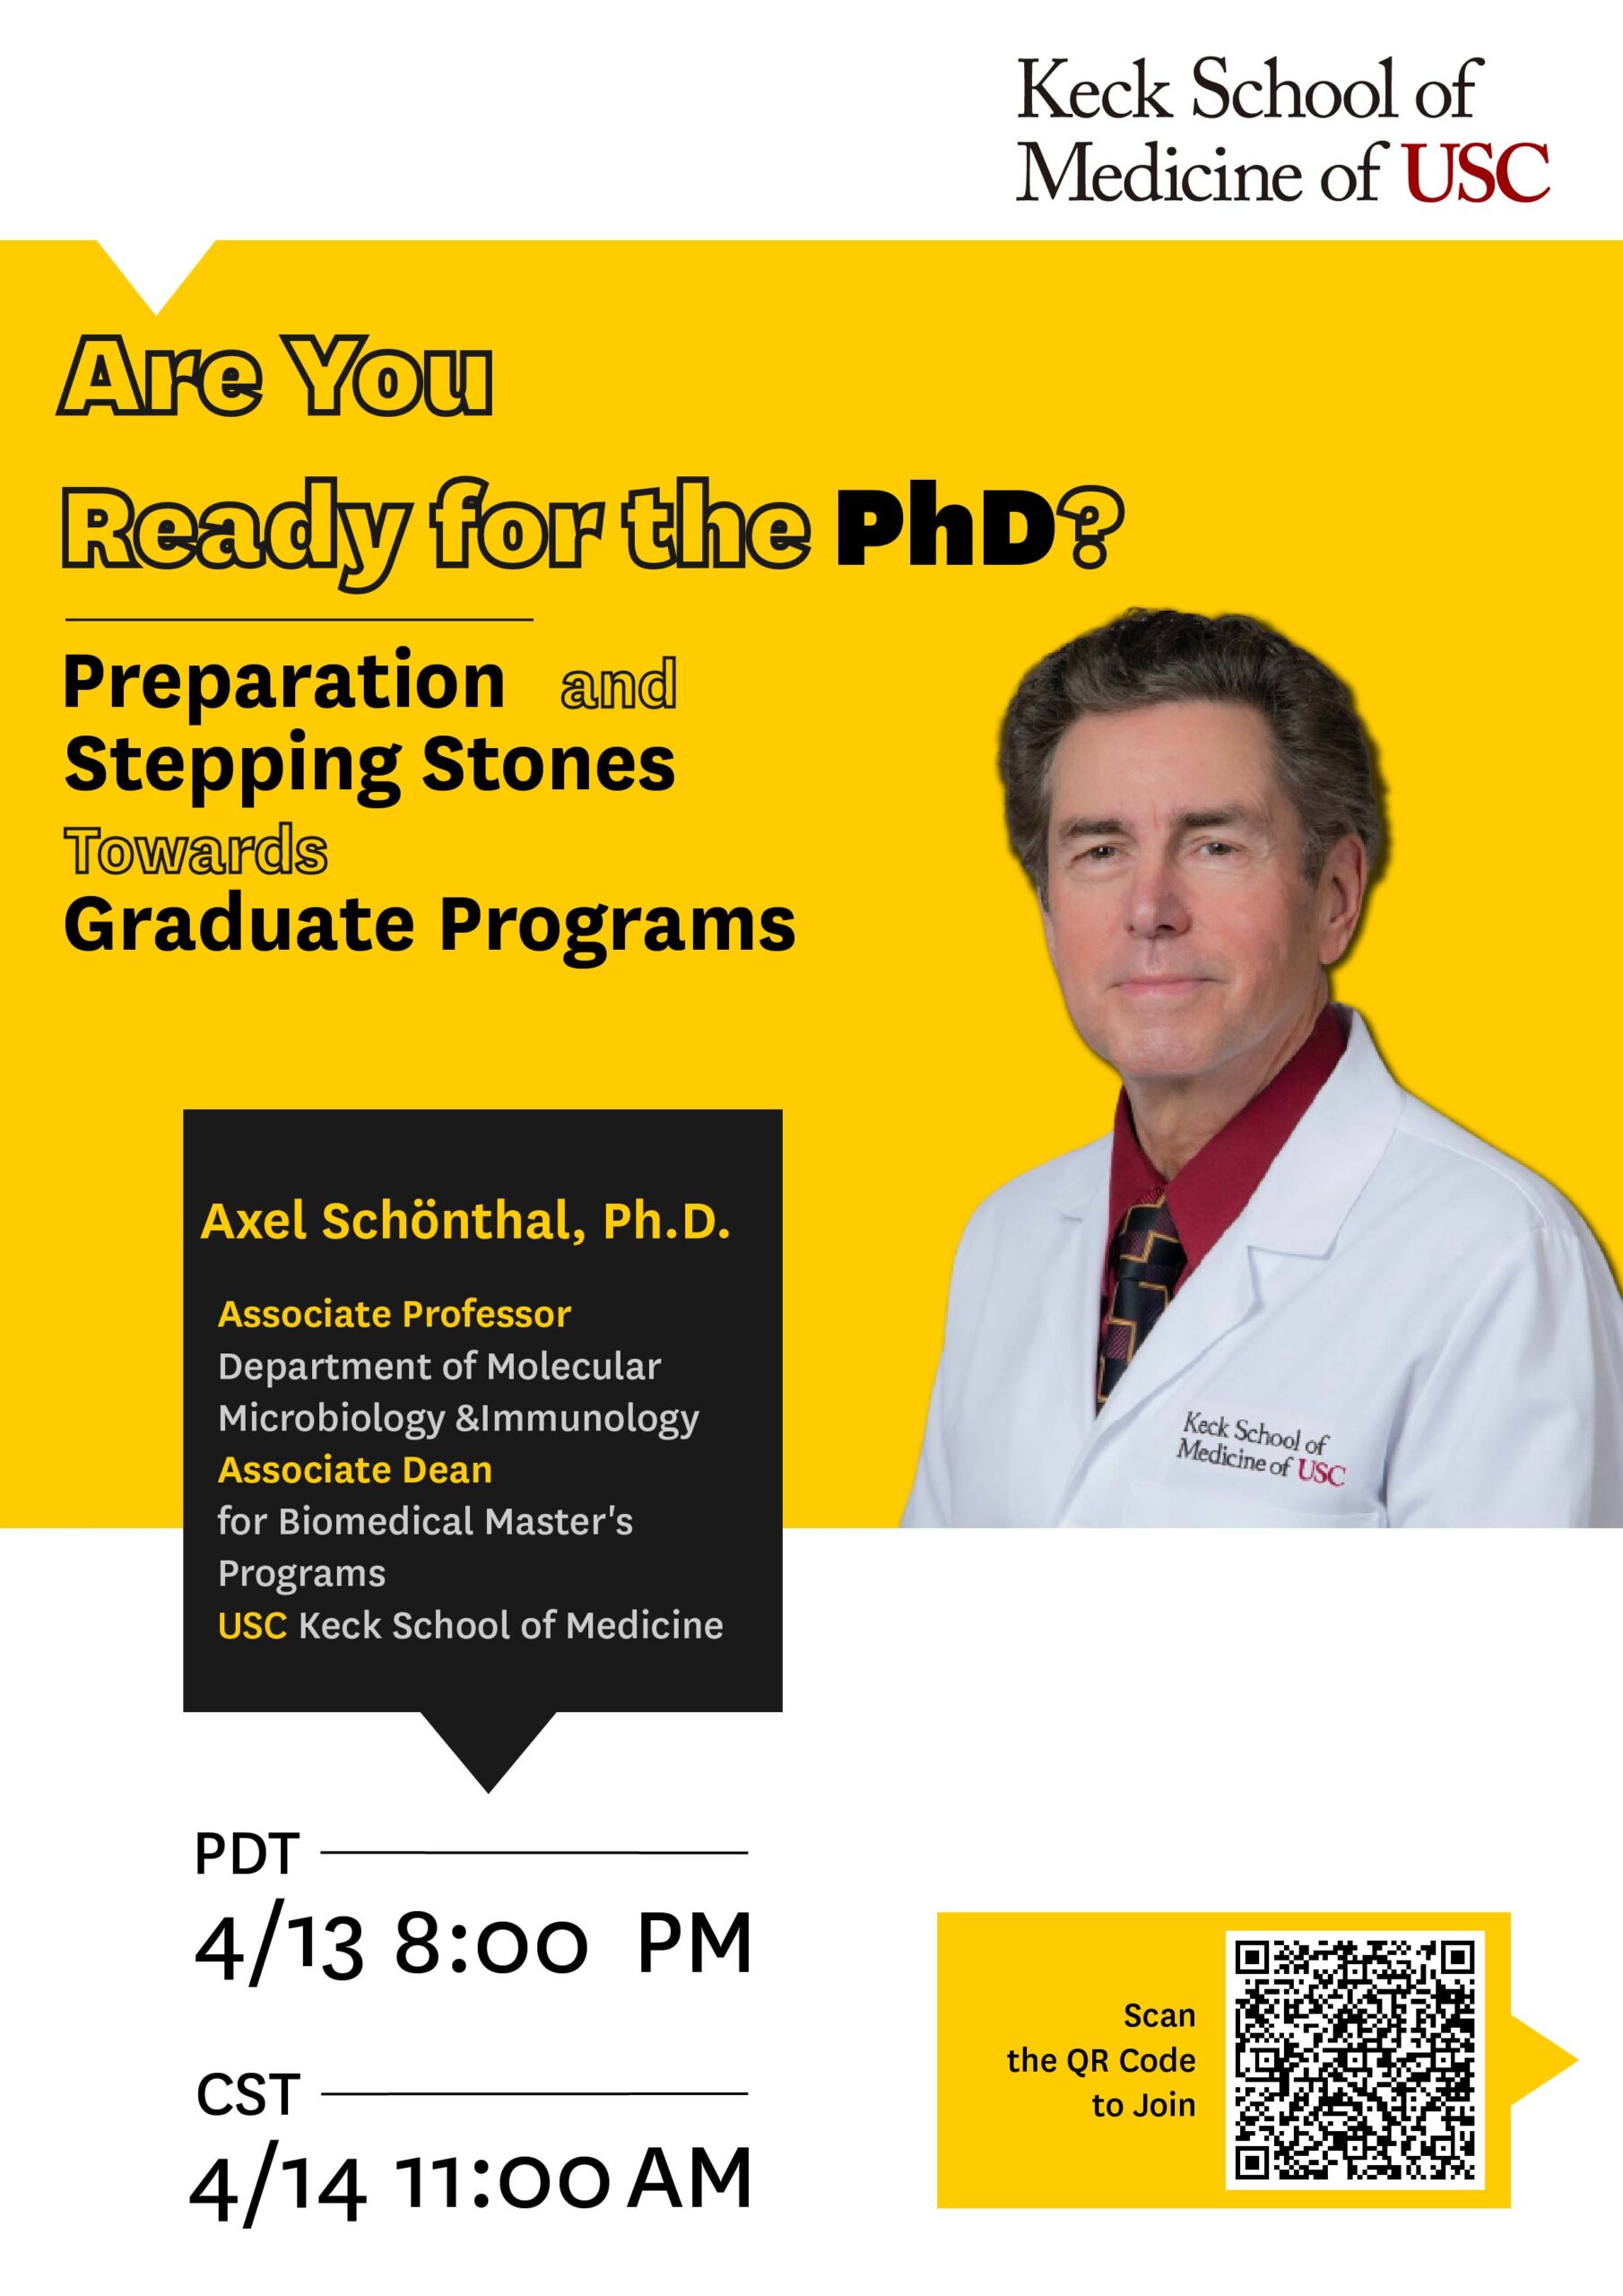 Are You Ready for the PhD? — Preparation and Stepping Stones Towards Graduate Programs